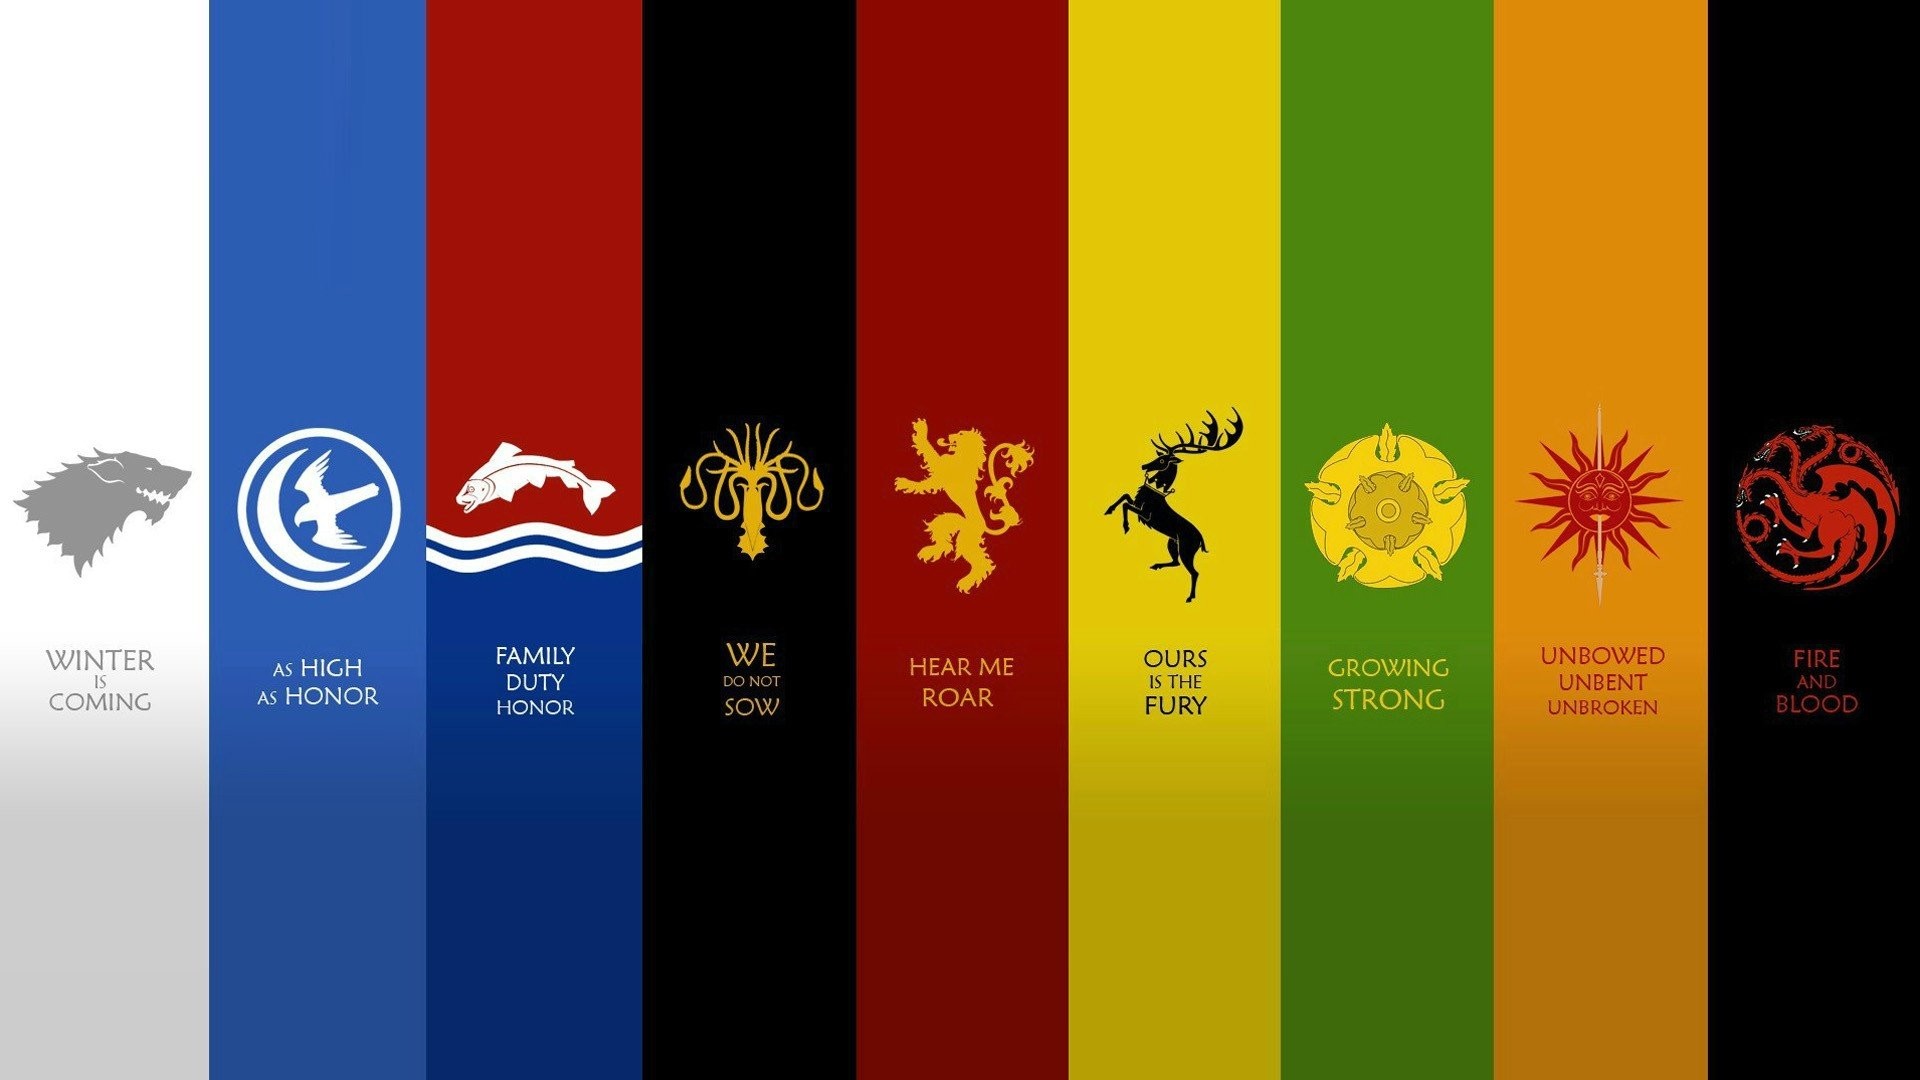 1920x1080 A Song Of Ice And Fire Emblems Fantasy Art Game Thrones George R. Martin  House Arryn Baratheon Greyjoy Lannister Mormont Houses Stark Targaryen  Tully Quotes ...